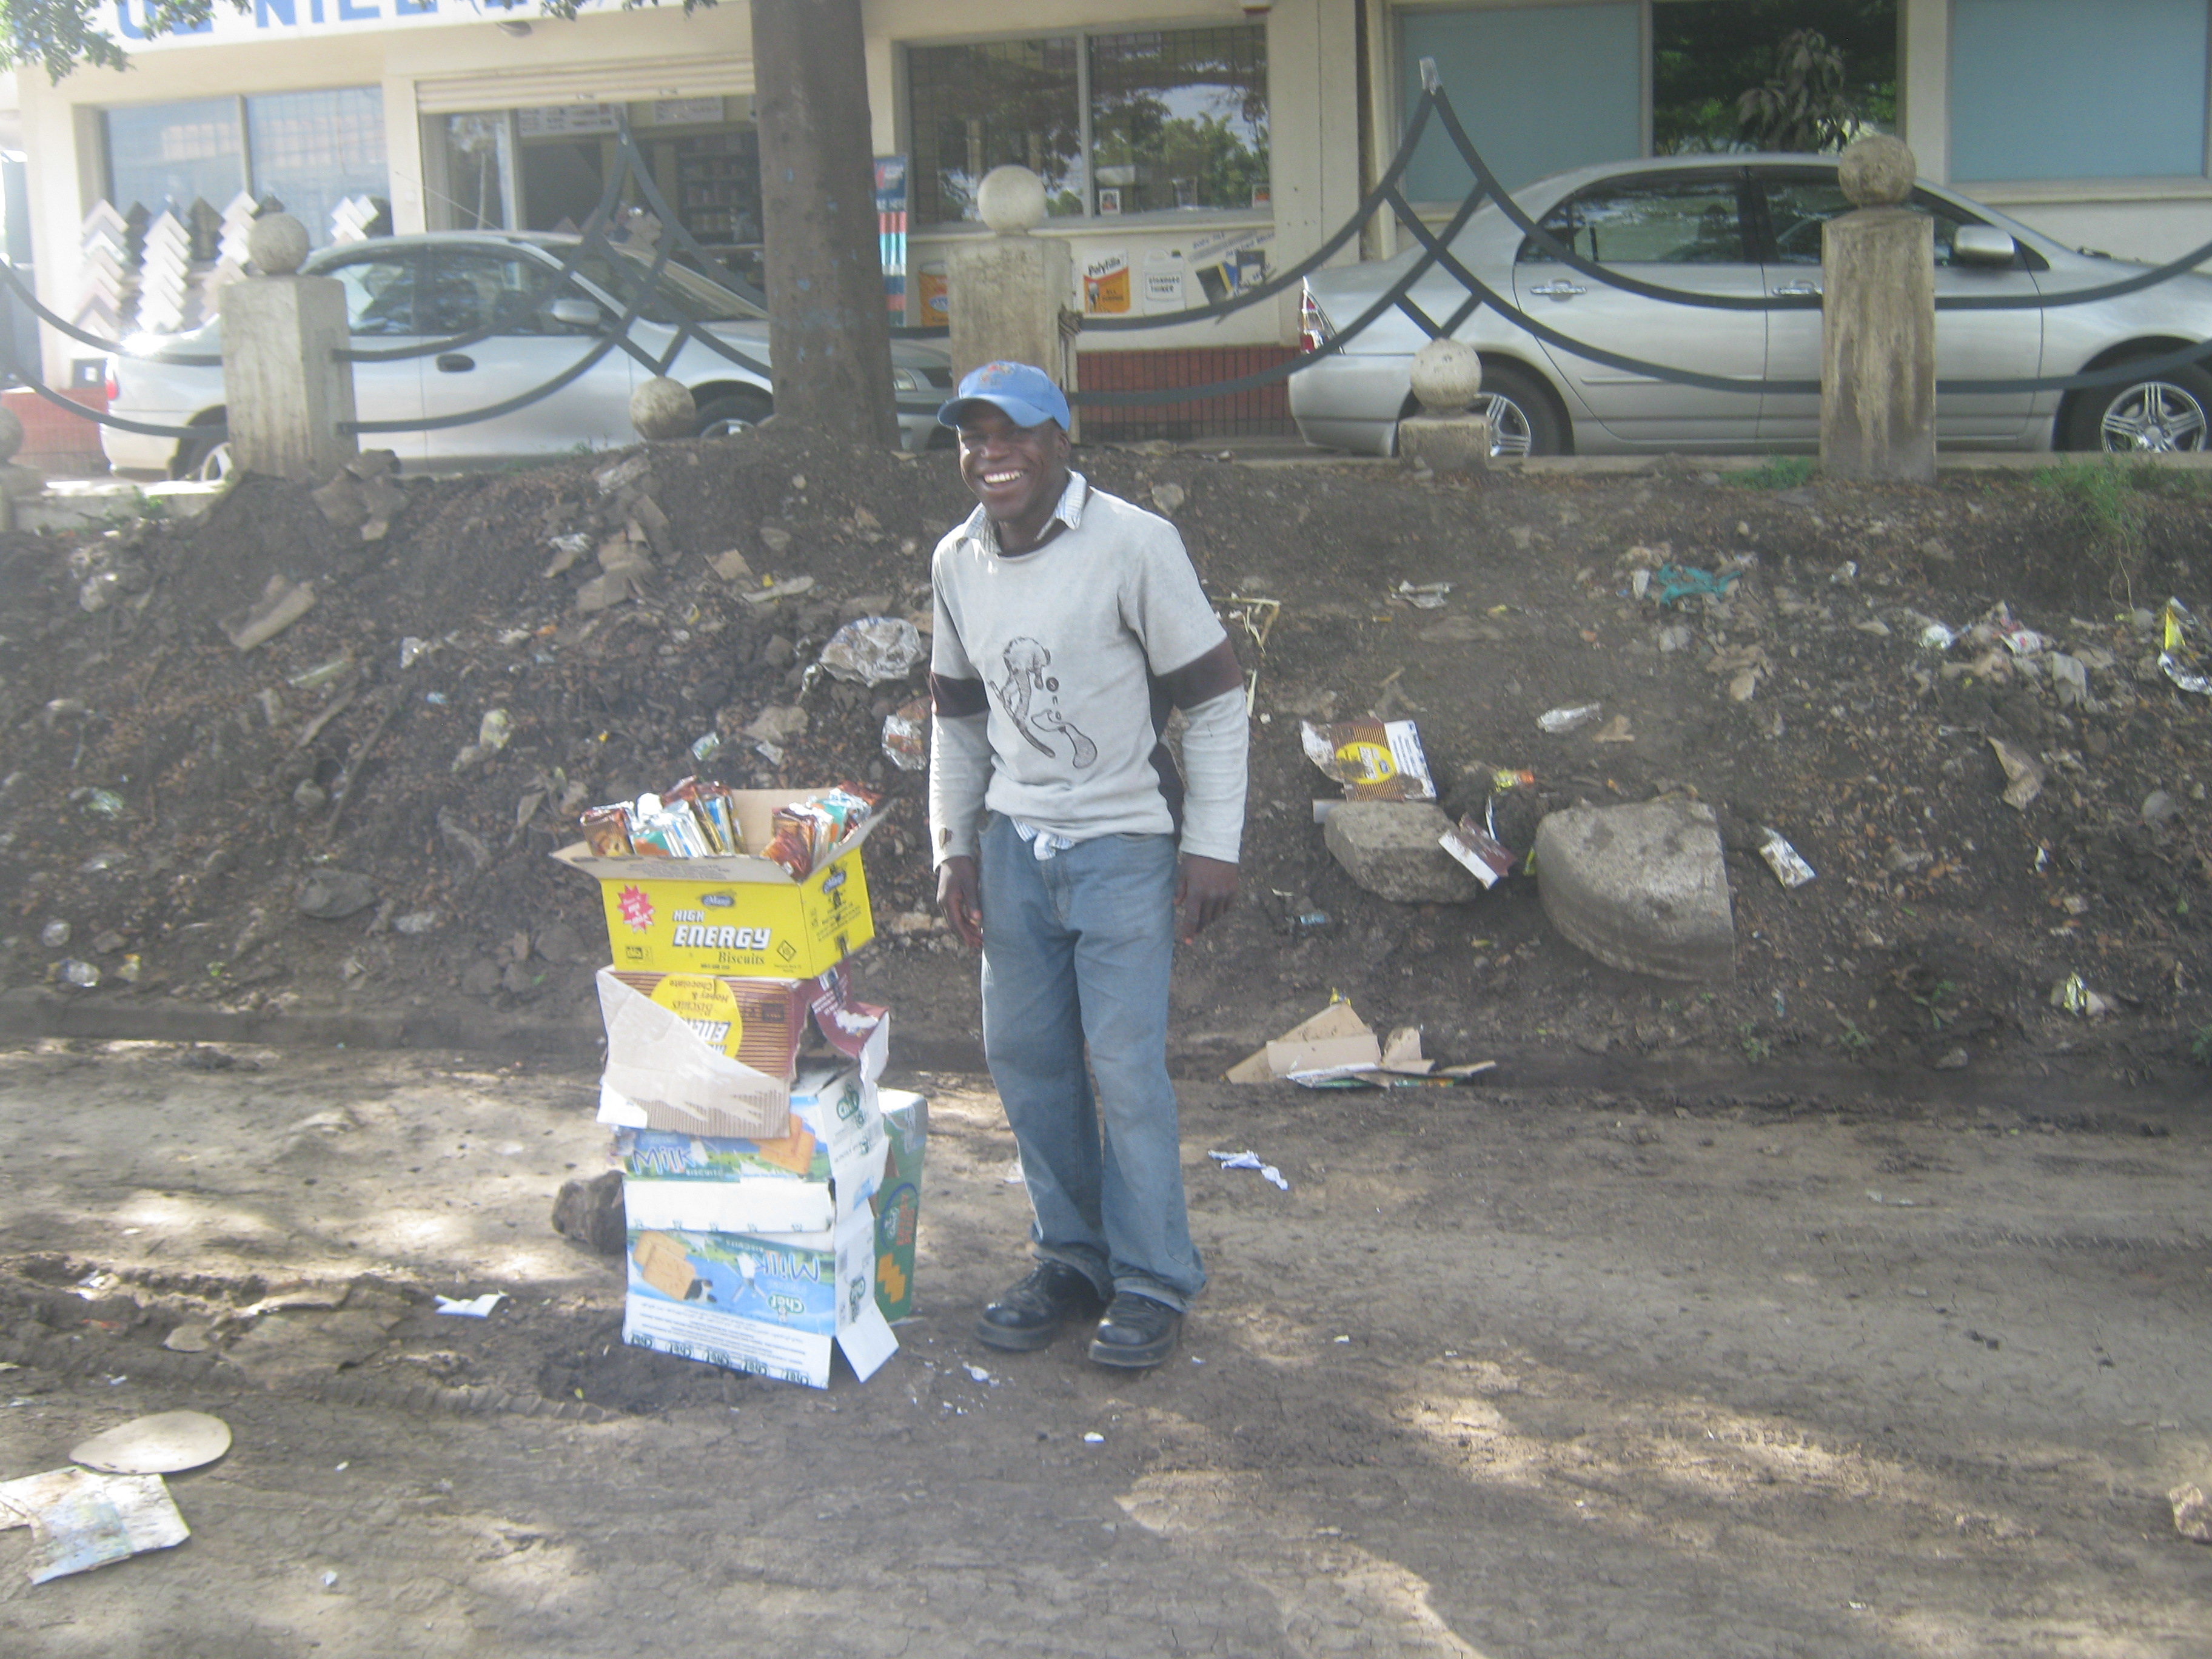 The developing world’s rising middle classes do not show much concern for the poor so far: street vendor in Nairobi.